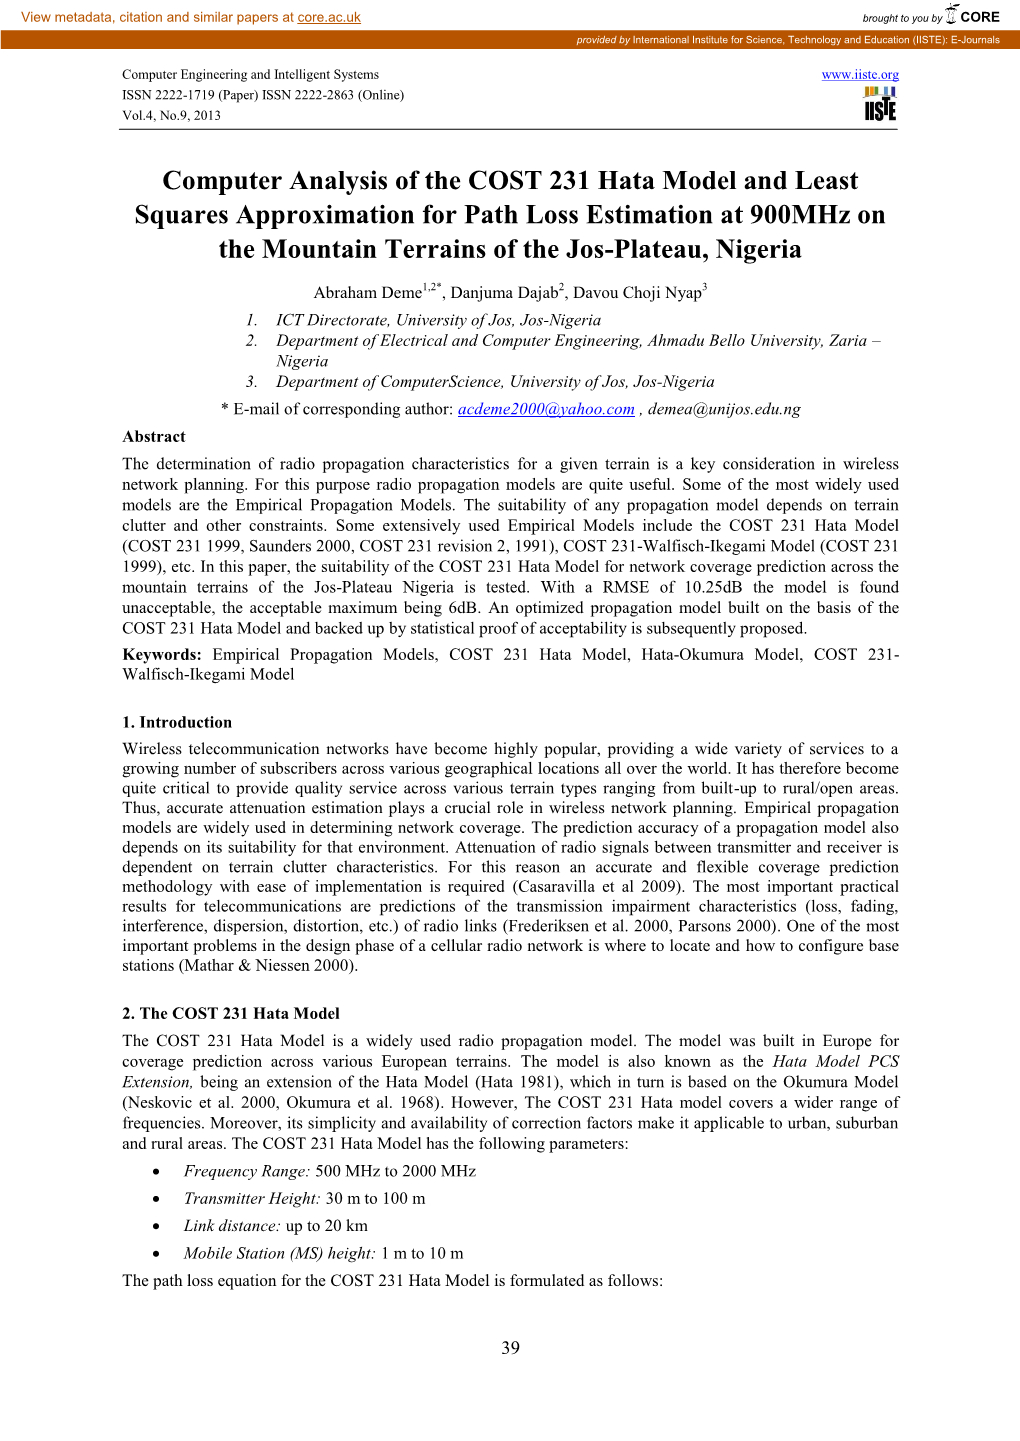 Computer Analysis of the COST 231 Hata Model and Least Squares Approximation for Path Loss Estimation at 900Mhz on the Mountain Terrains of the Jos-Plateau, Nigeria